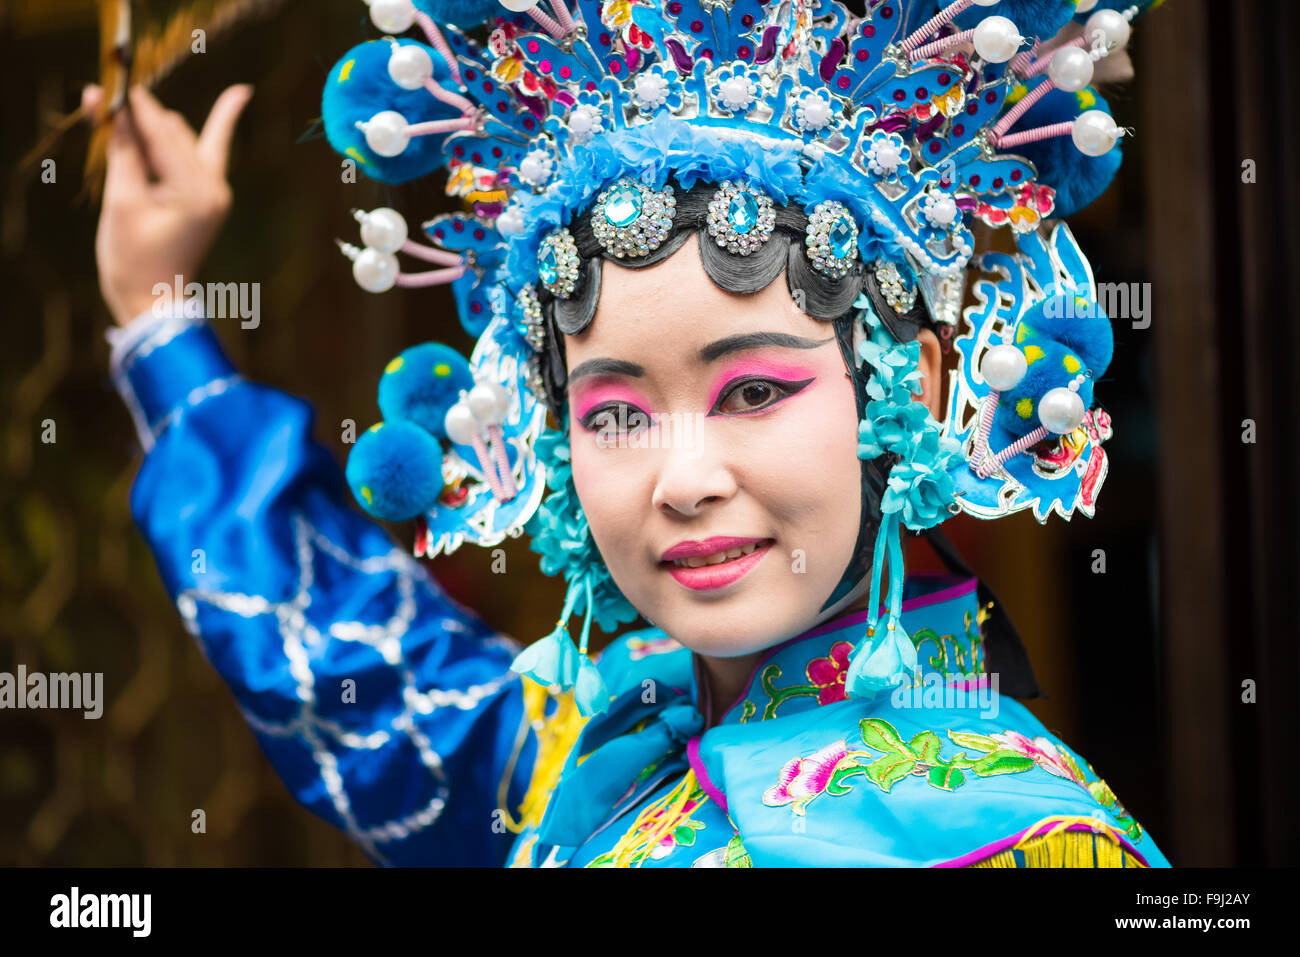 Chengdu, Sichuan Province, China - Dec 11, 2015 : Portrait of a young woman dressed in Sichuan Opera traditional costume. Stock Photo